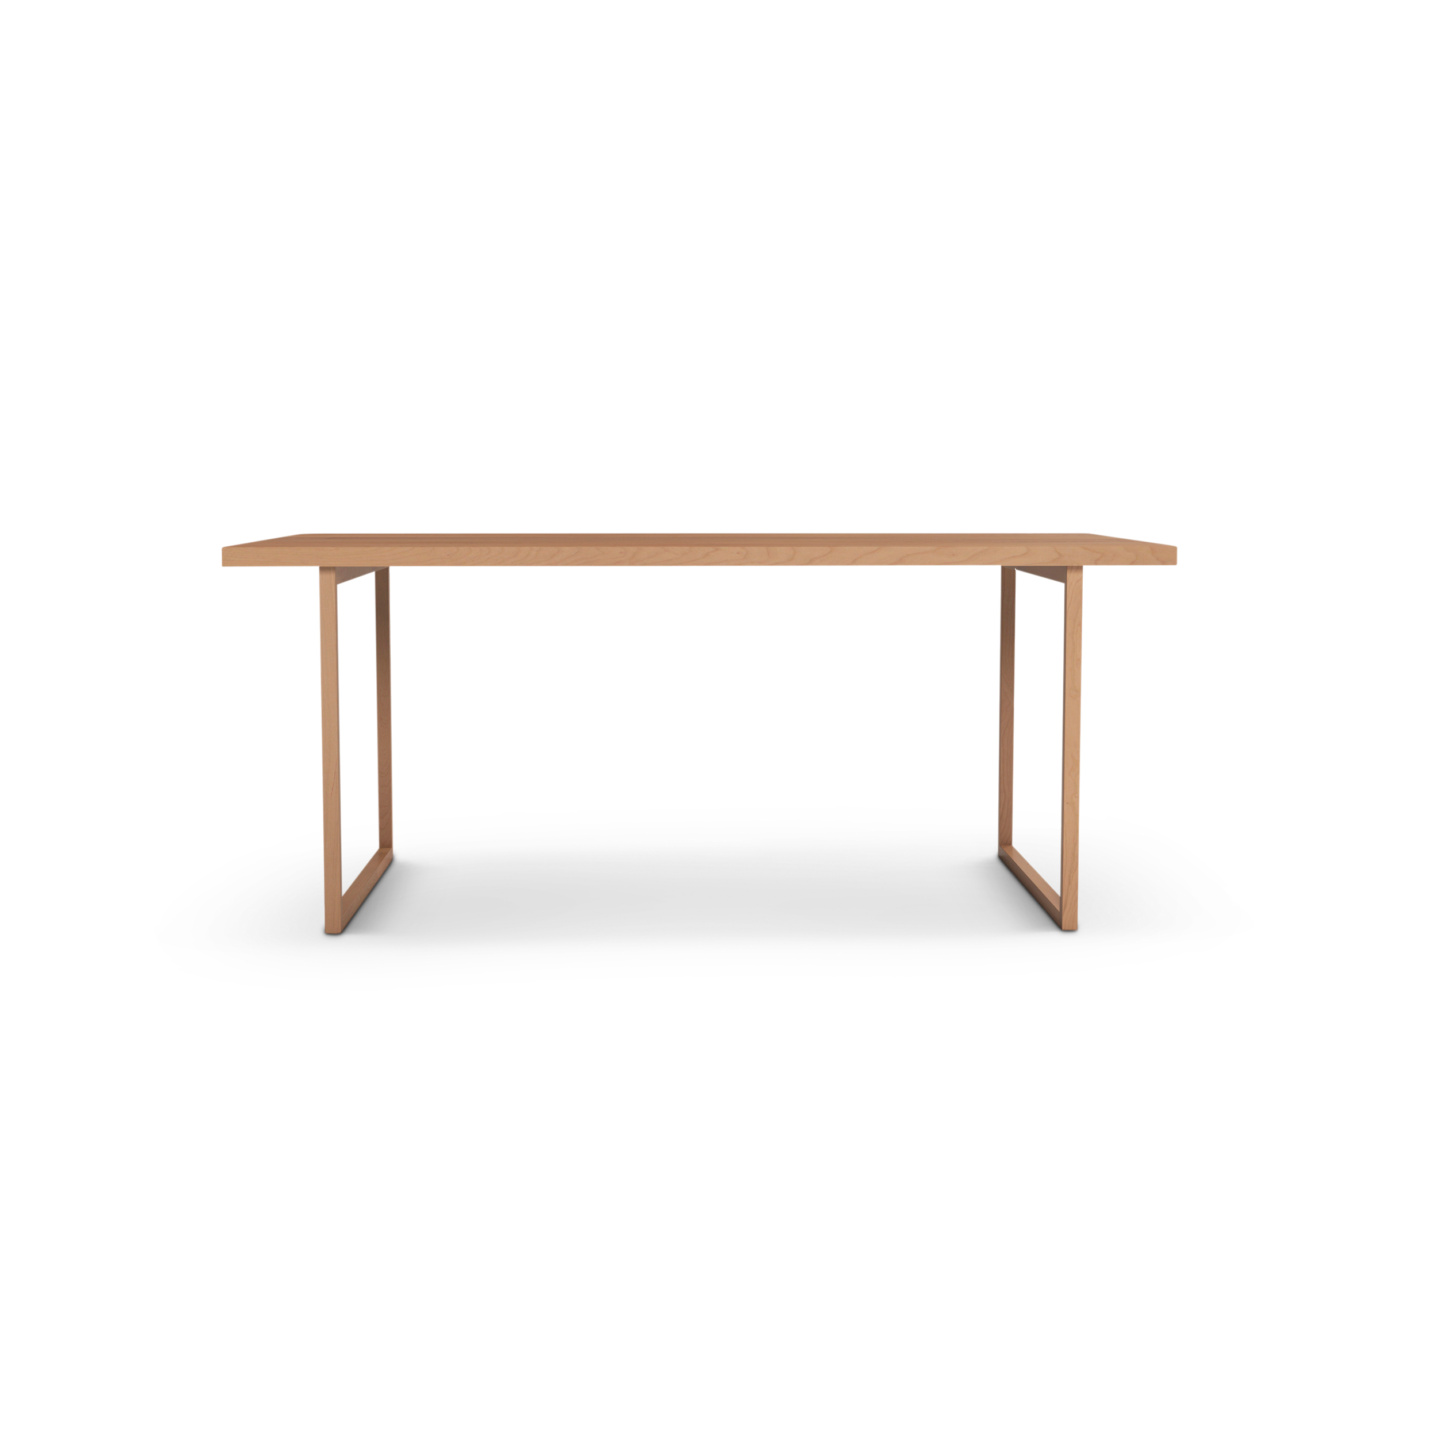 Cherry table with solid wood square legs